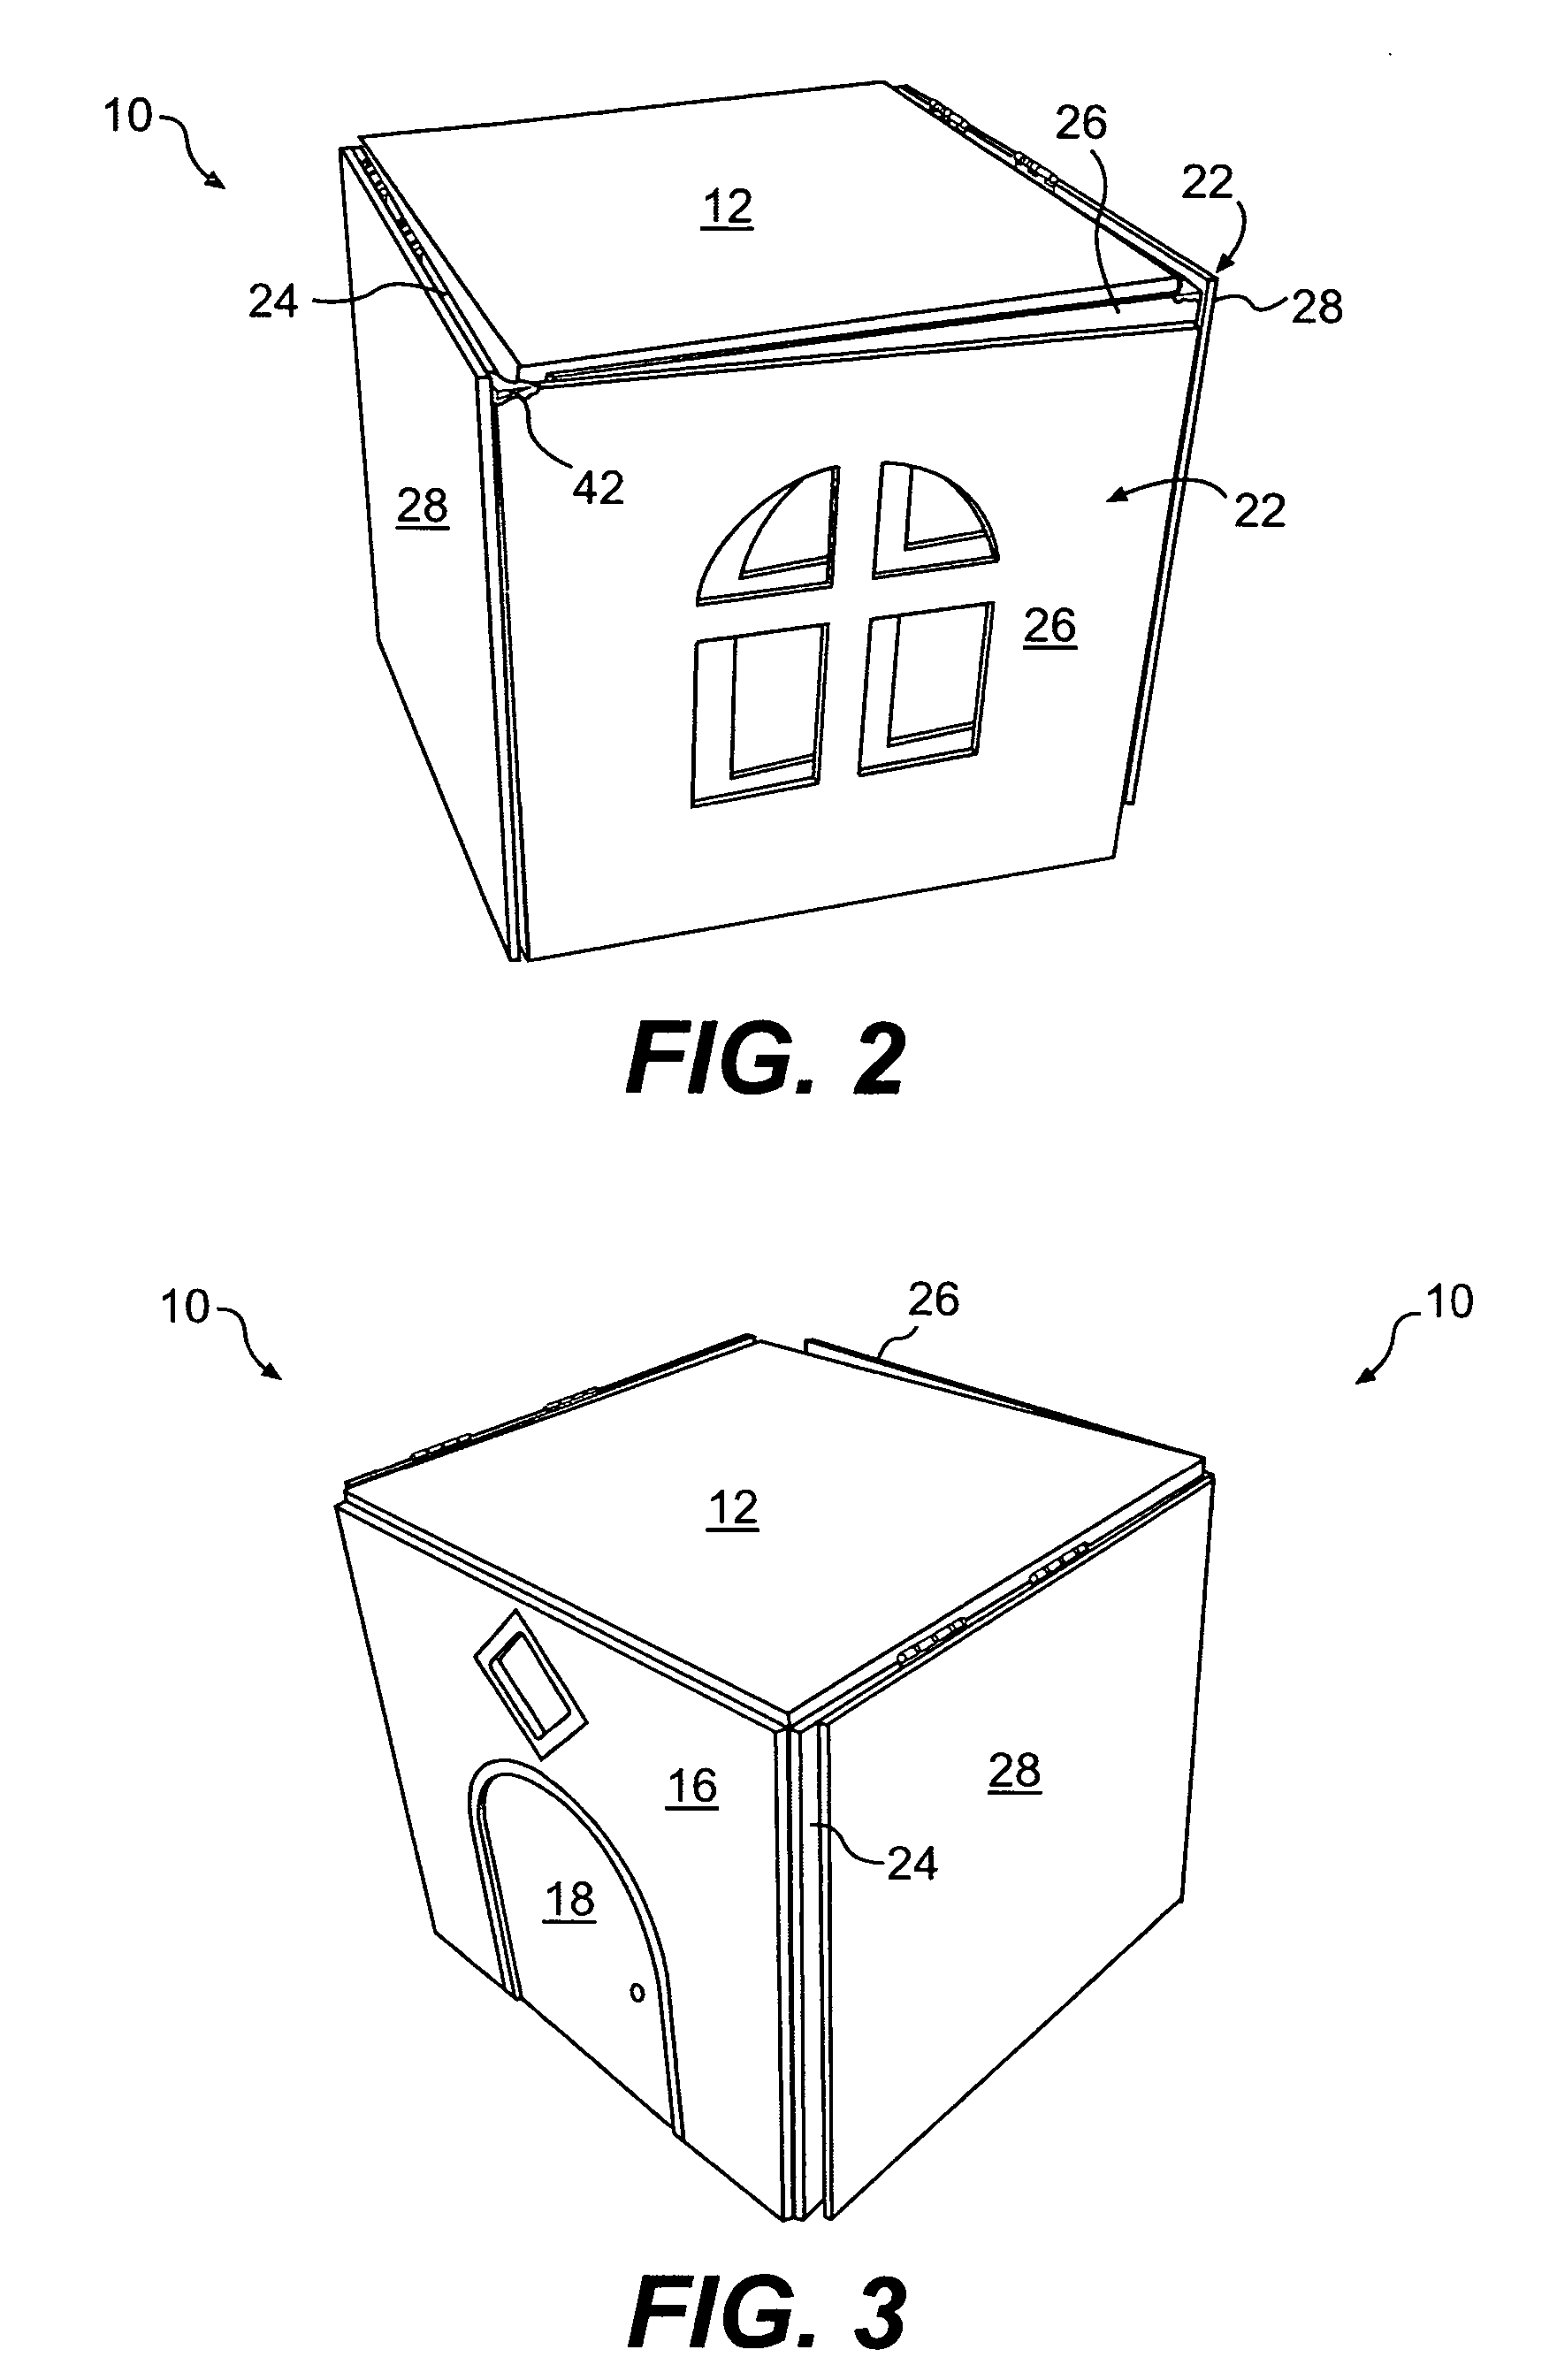 Collapsible structure for demonstrating and interacting with large-scale dolls